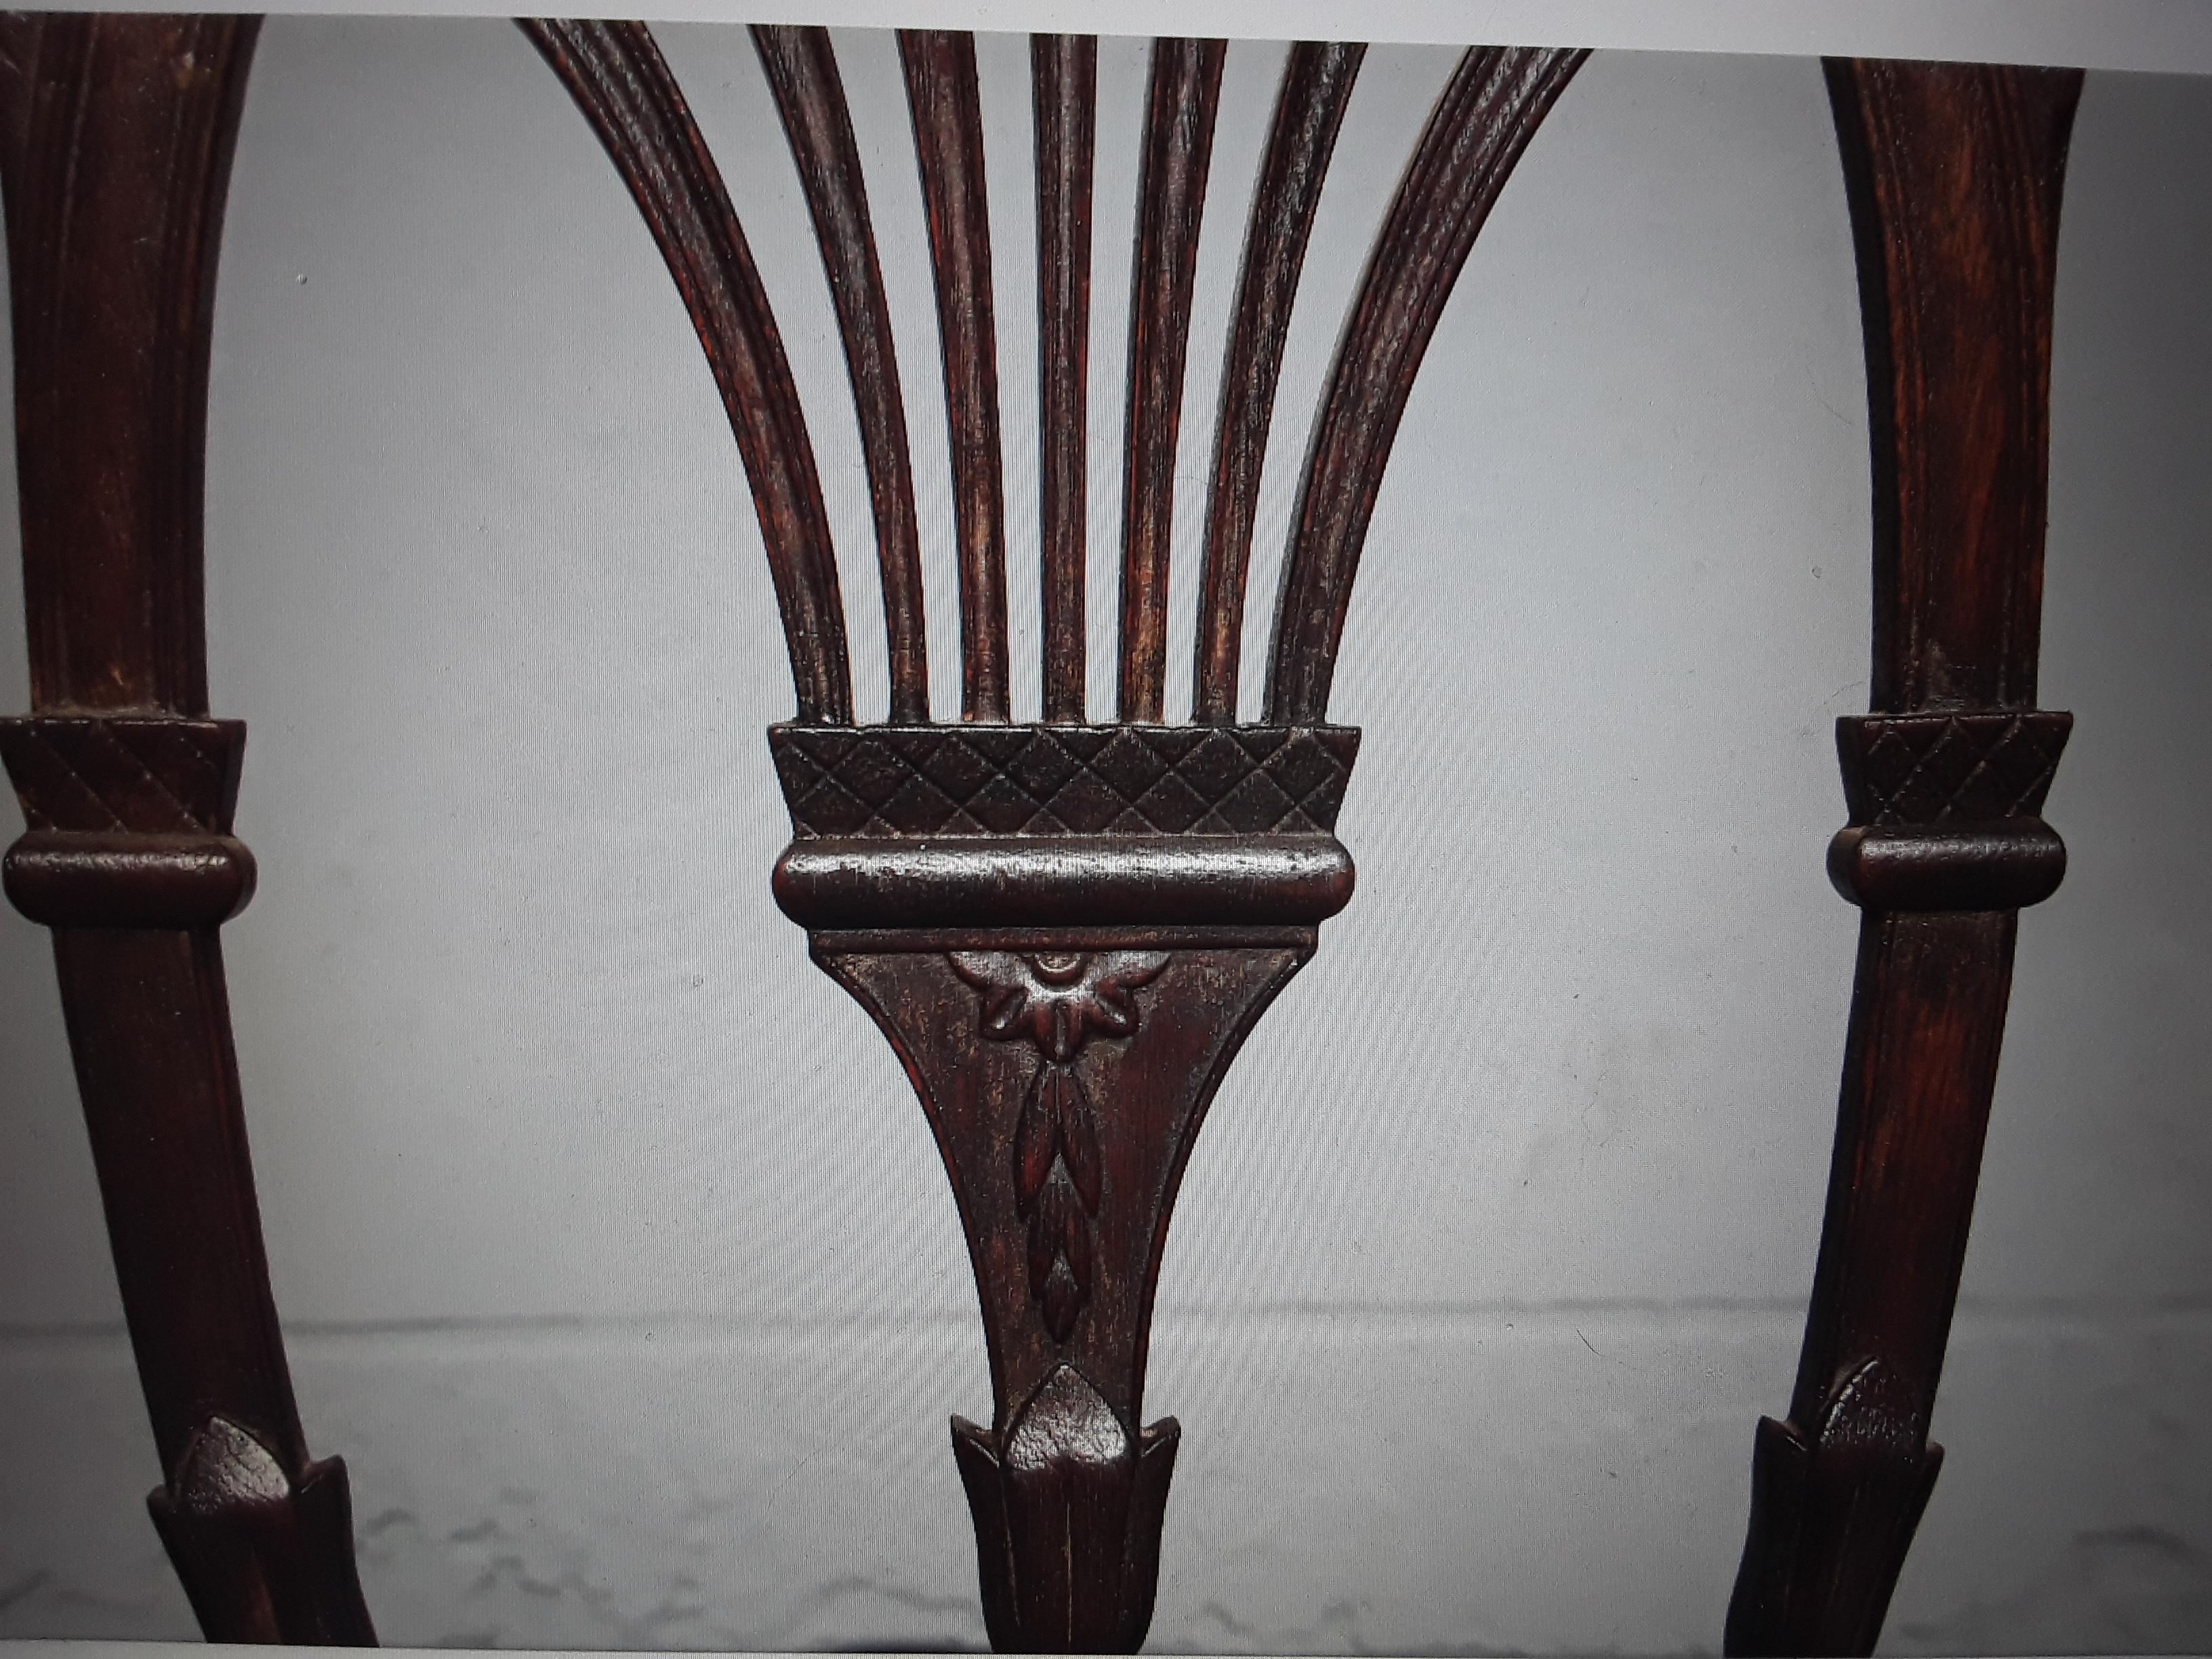 c1900 Antique Heavily and Masterfully Carved Armchair in the Sheraton Style. Incredibly beautiful carving.